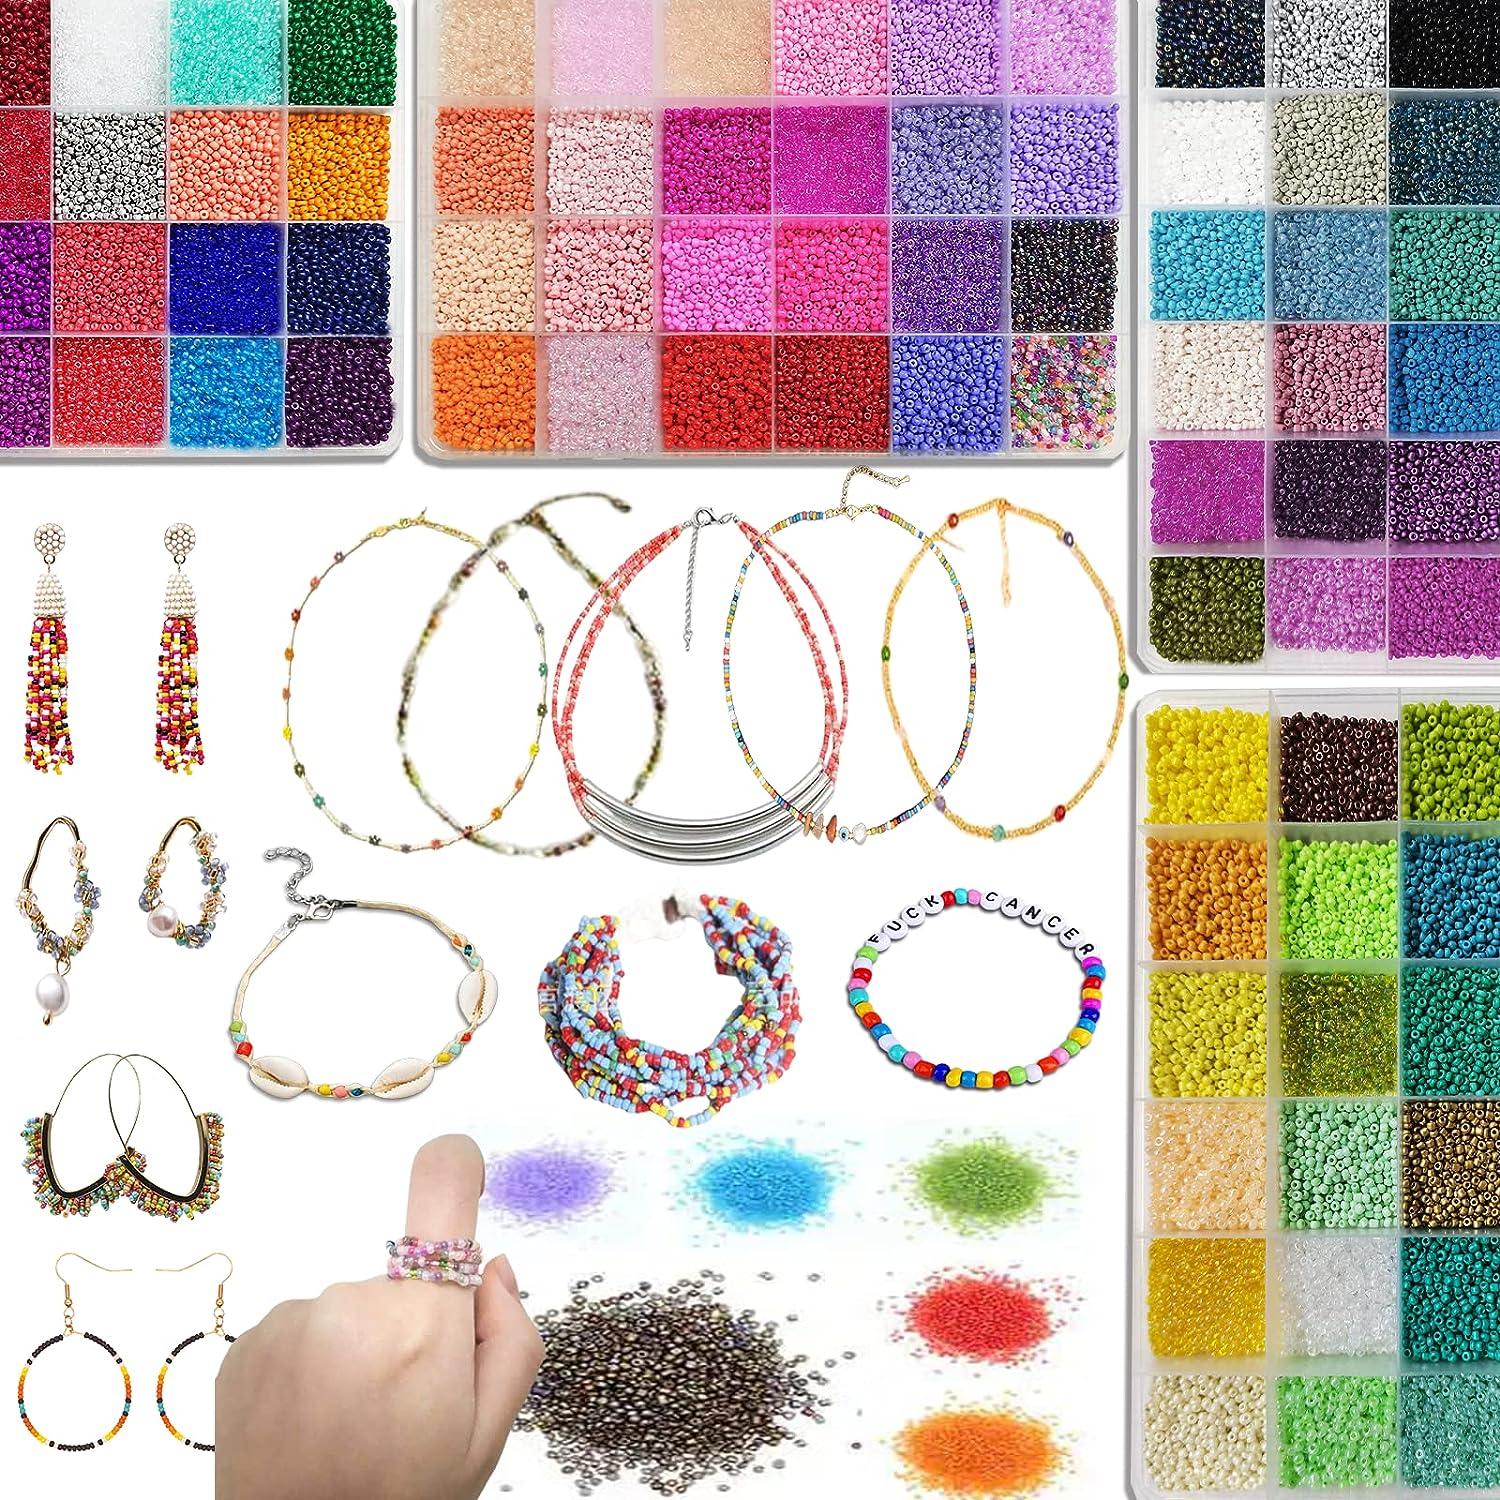 Miotorio 40320+Pcs Glass Seed Beads for Jewelry Making Kit 2mm 56 Colors Small Beads Kit with 300pcs Letter Beads Pendants for Bracelets Necklace